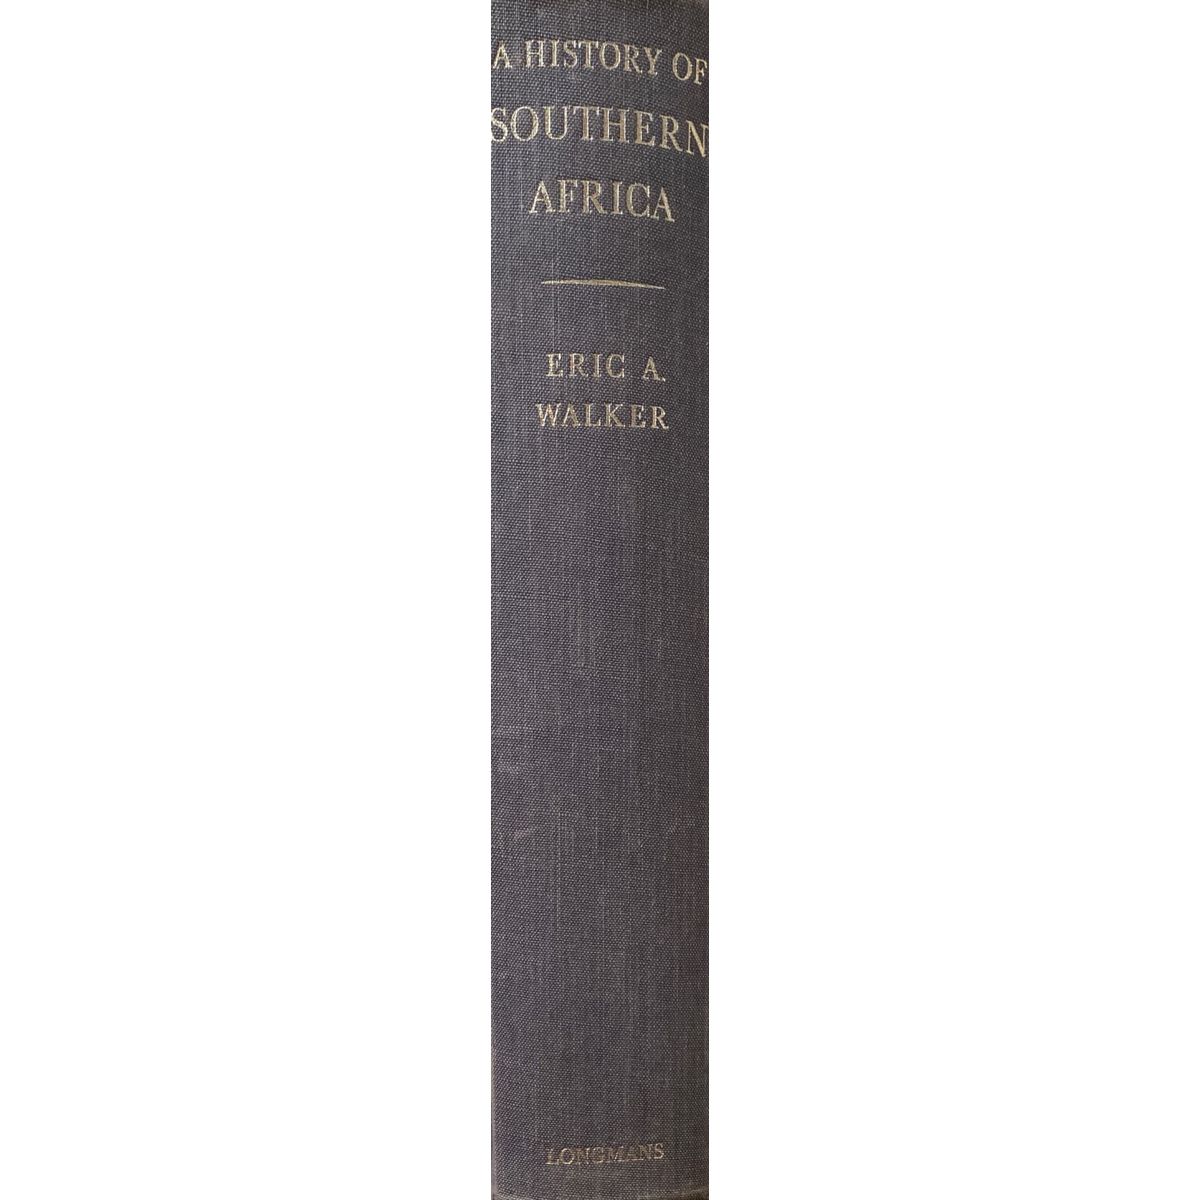 A History of Southern Africa by Eric A. Walker [1964]